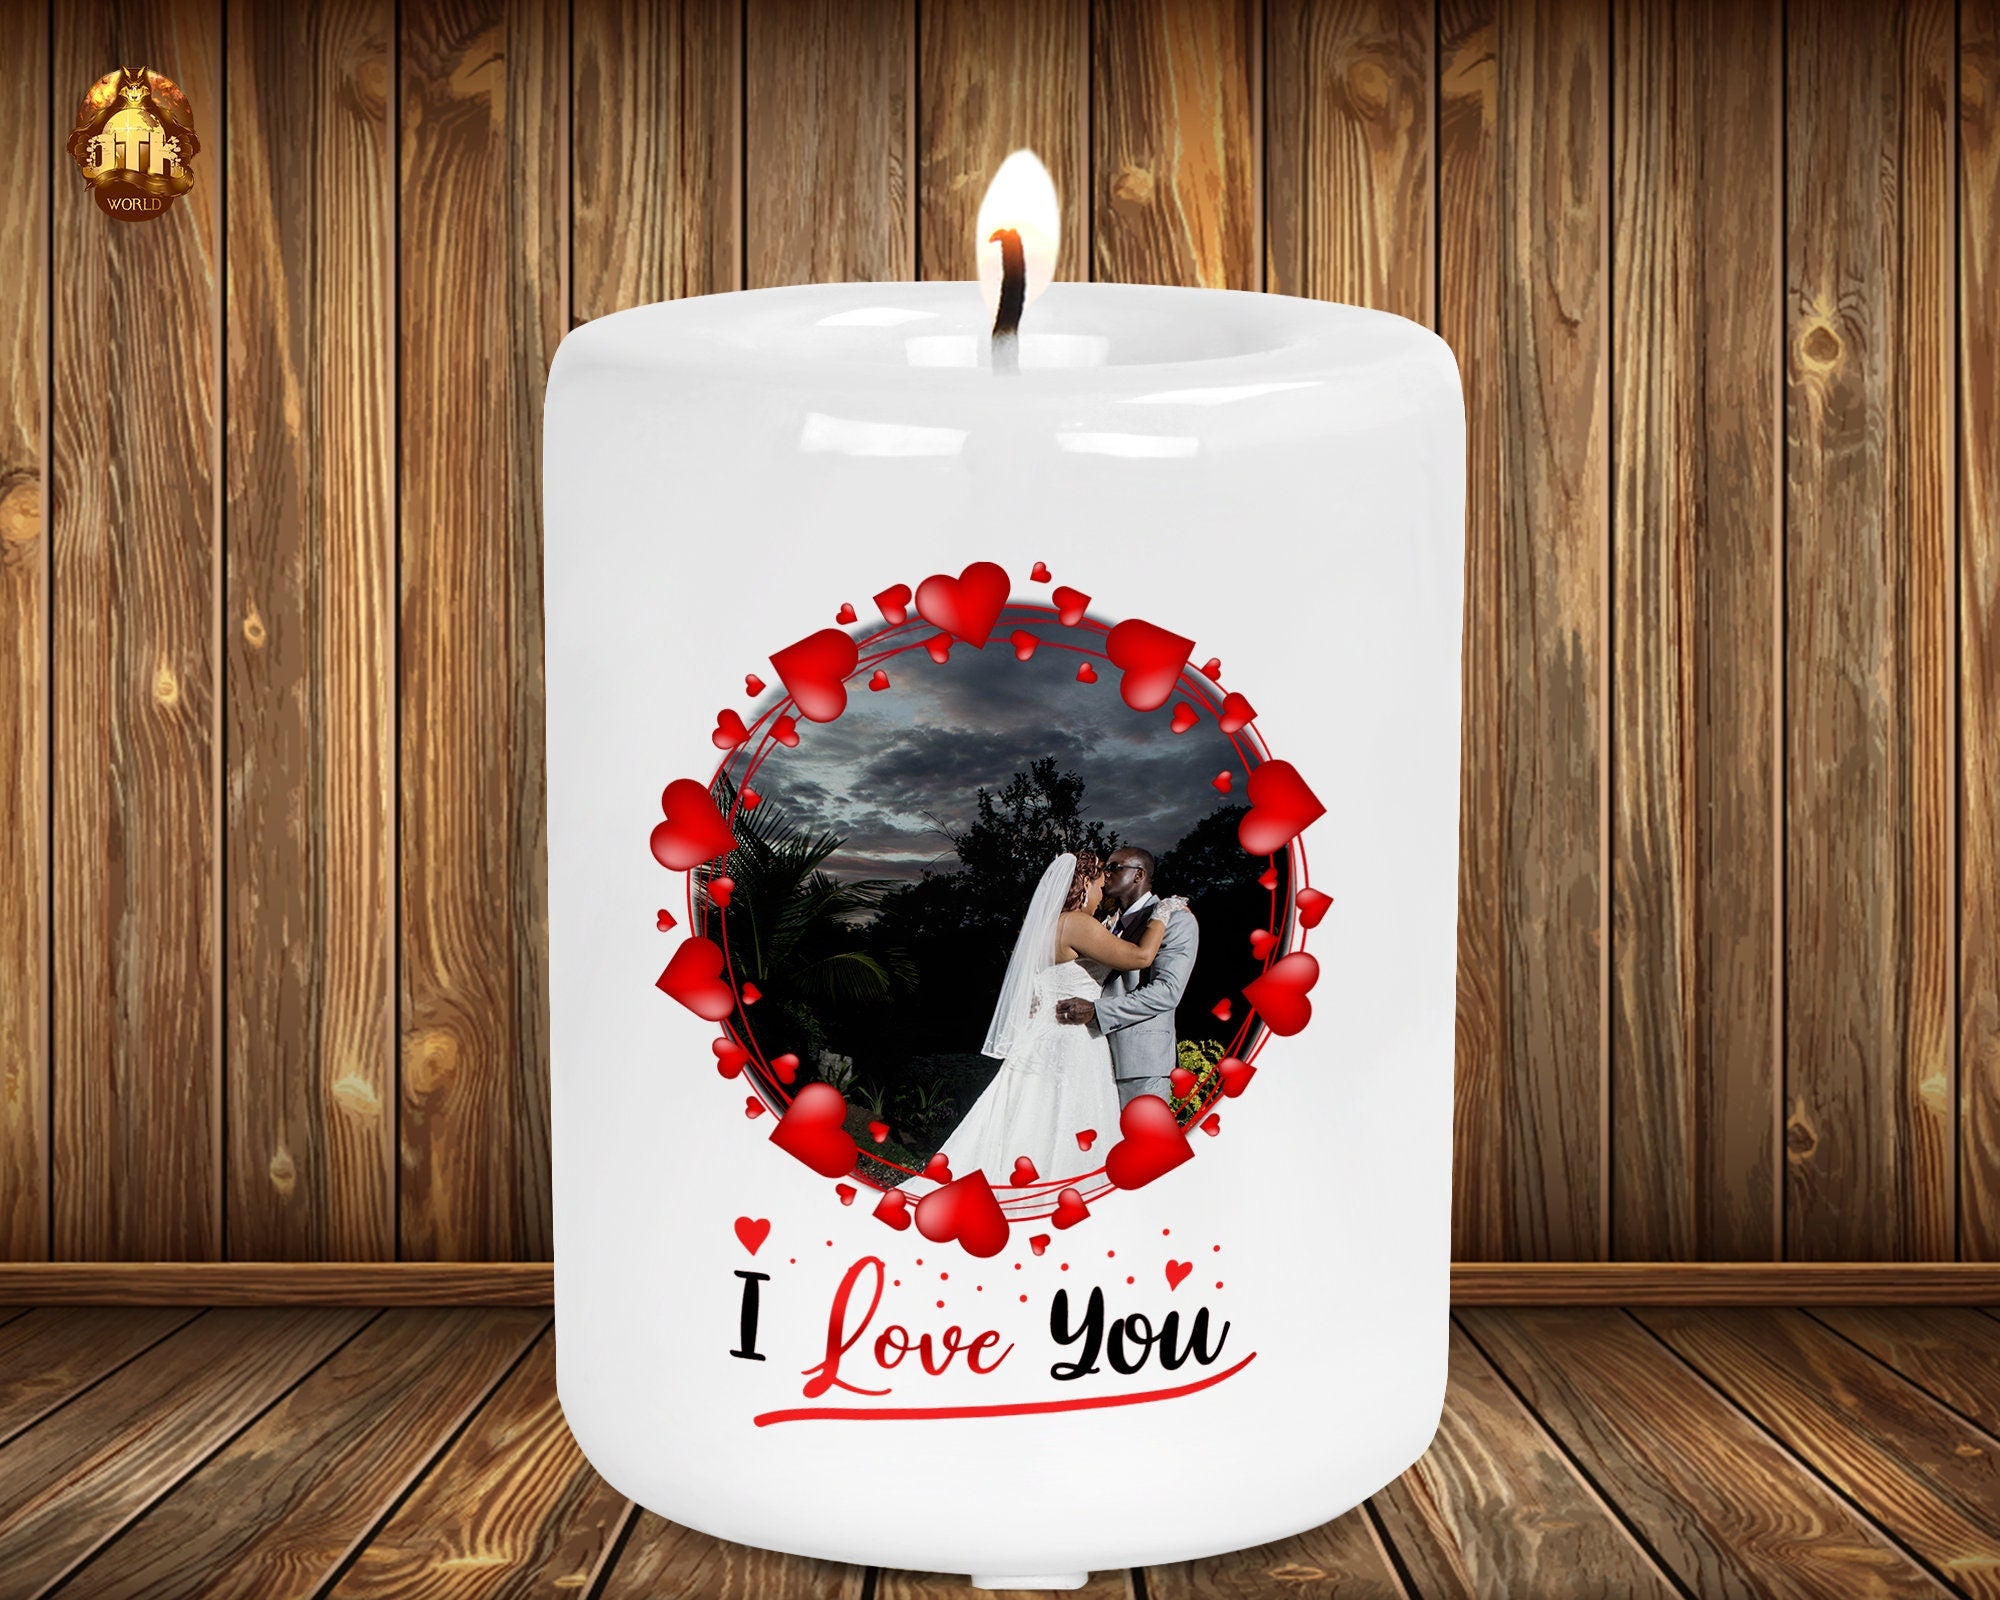 I Love You Personalized Photo Candle 